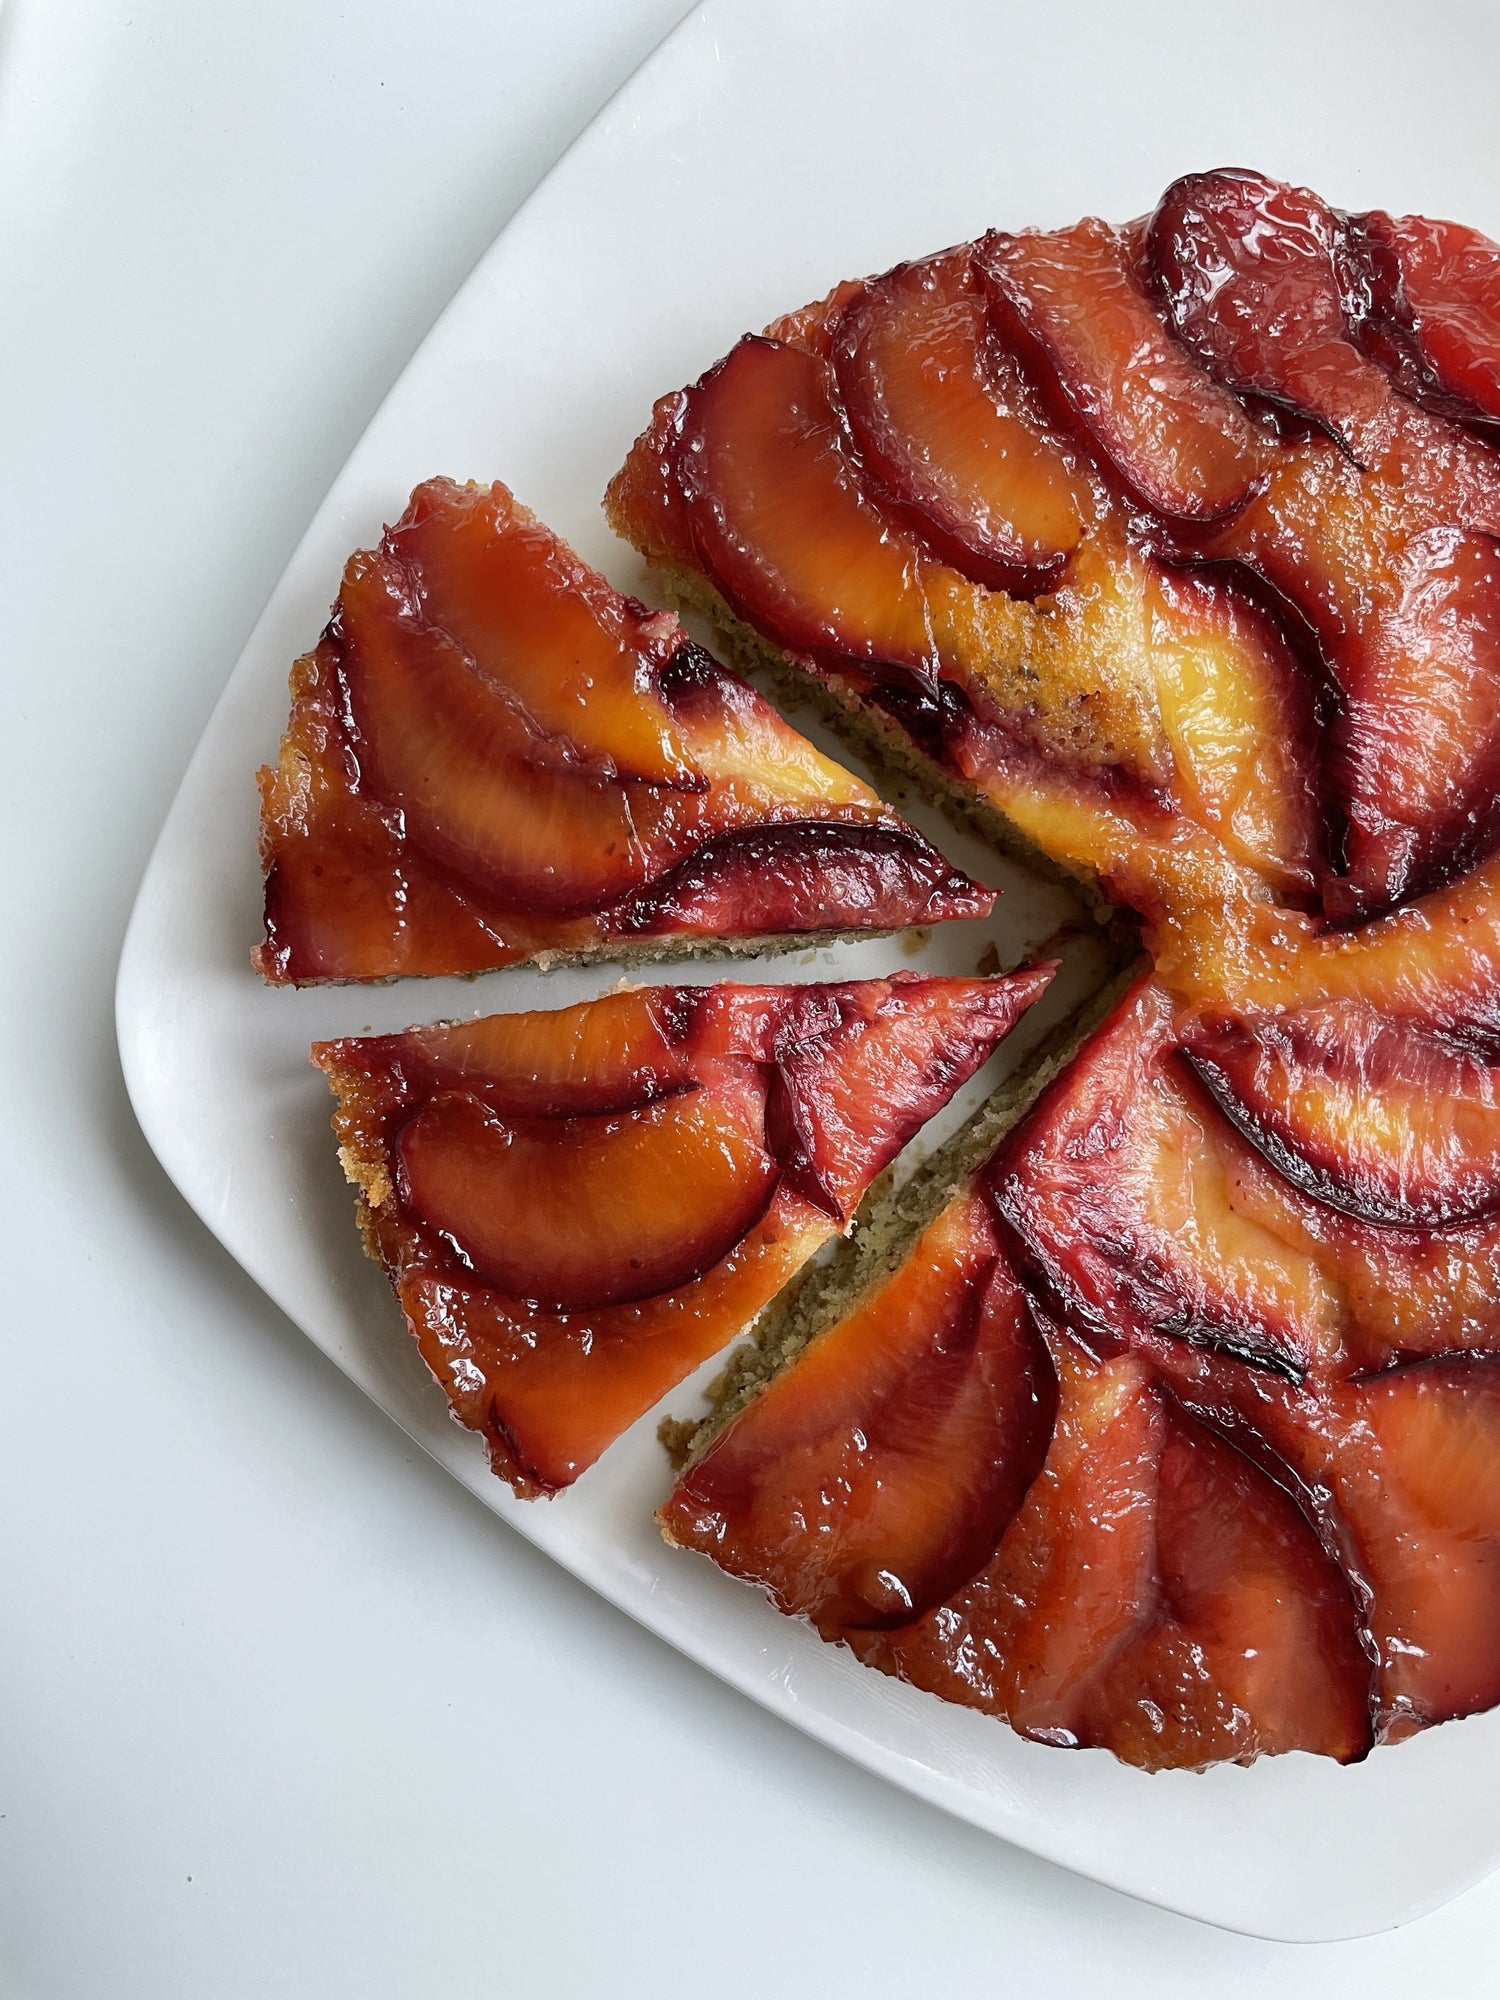 Plum Upside Down Olive Oil and Almond Cake